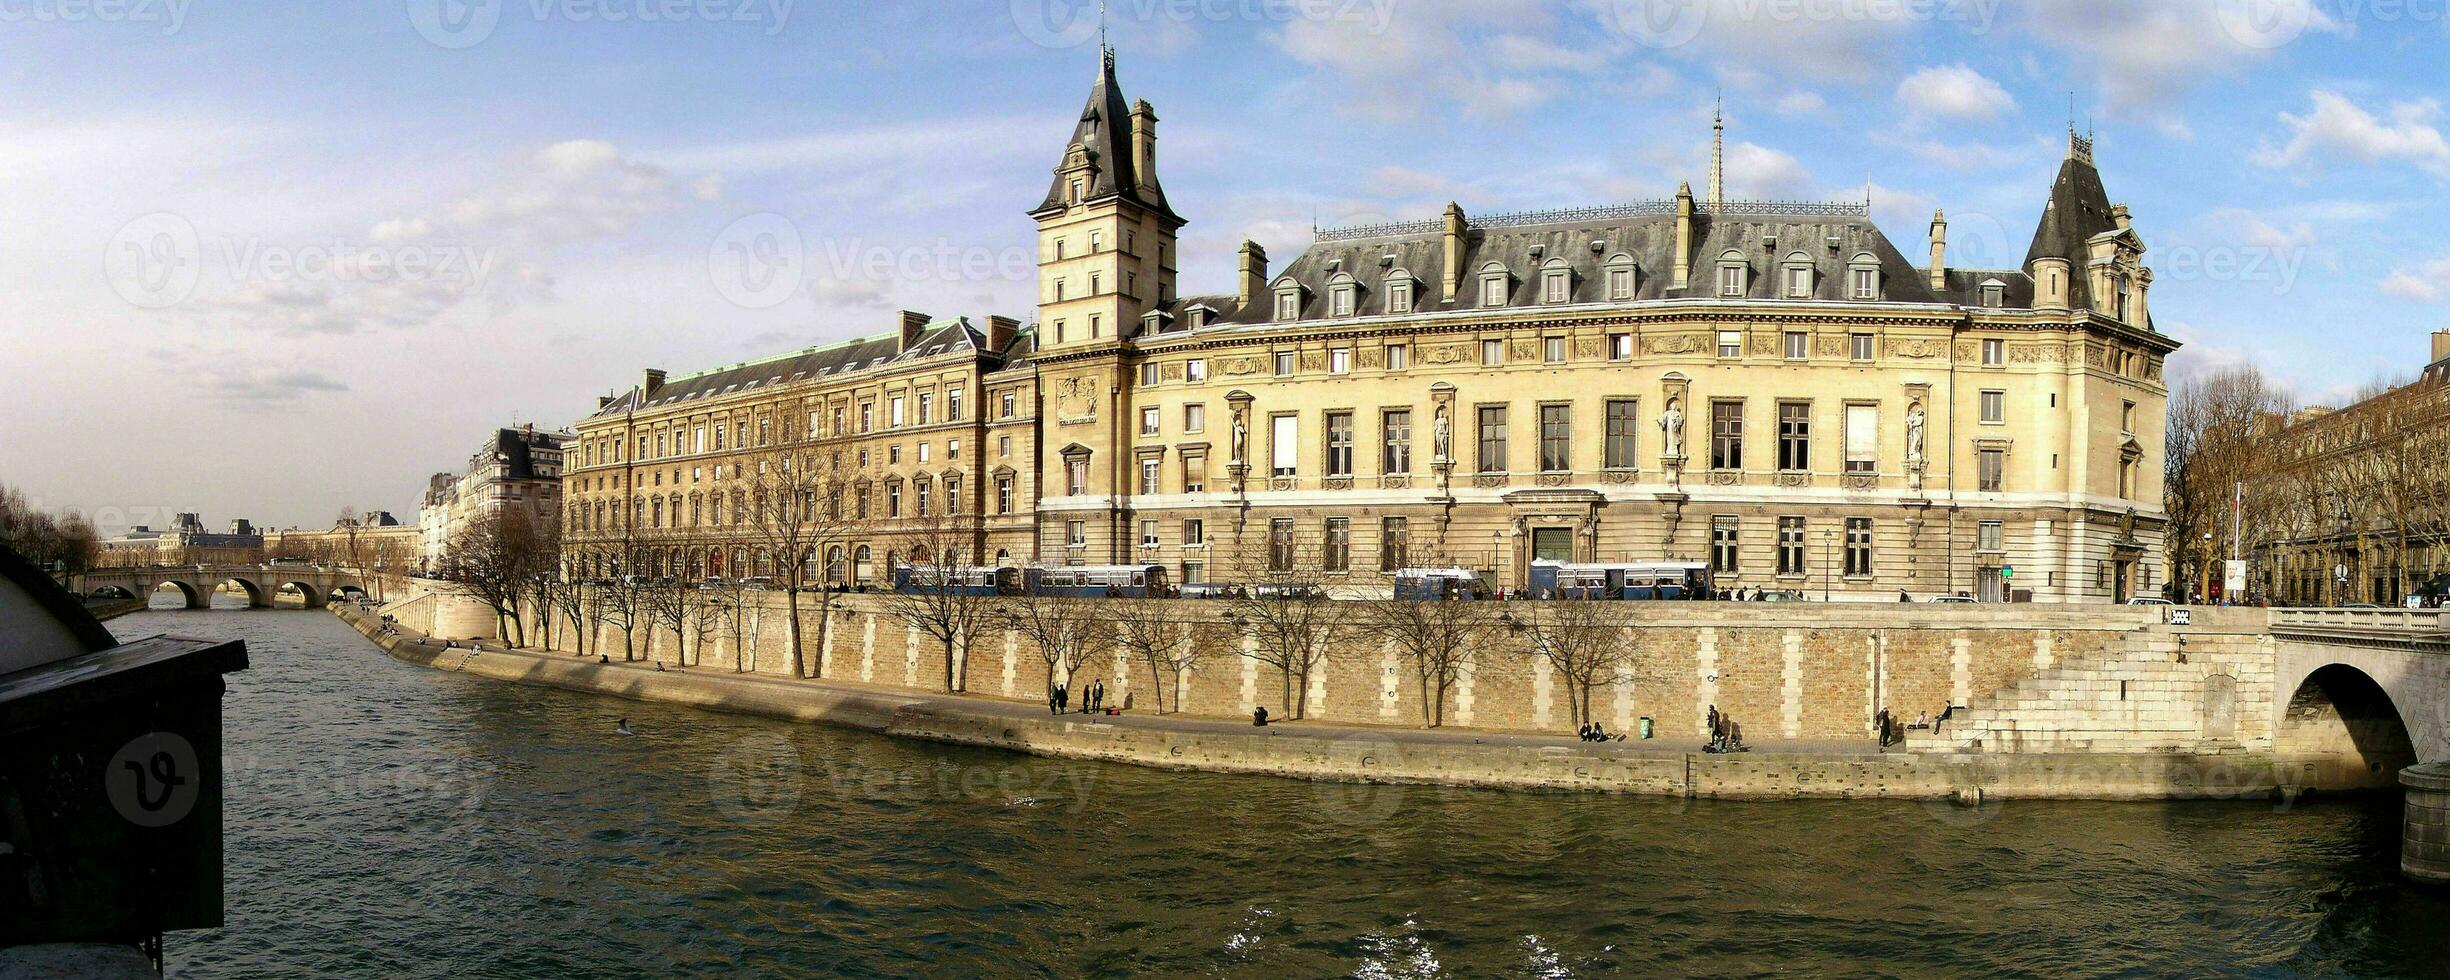 Panoramic View 36 Quai des Orfvres, Iconic Police Building on the Seine in Paris. photo